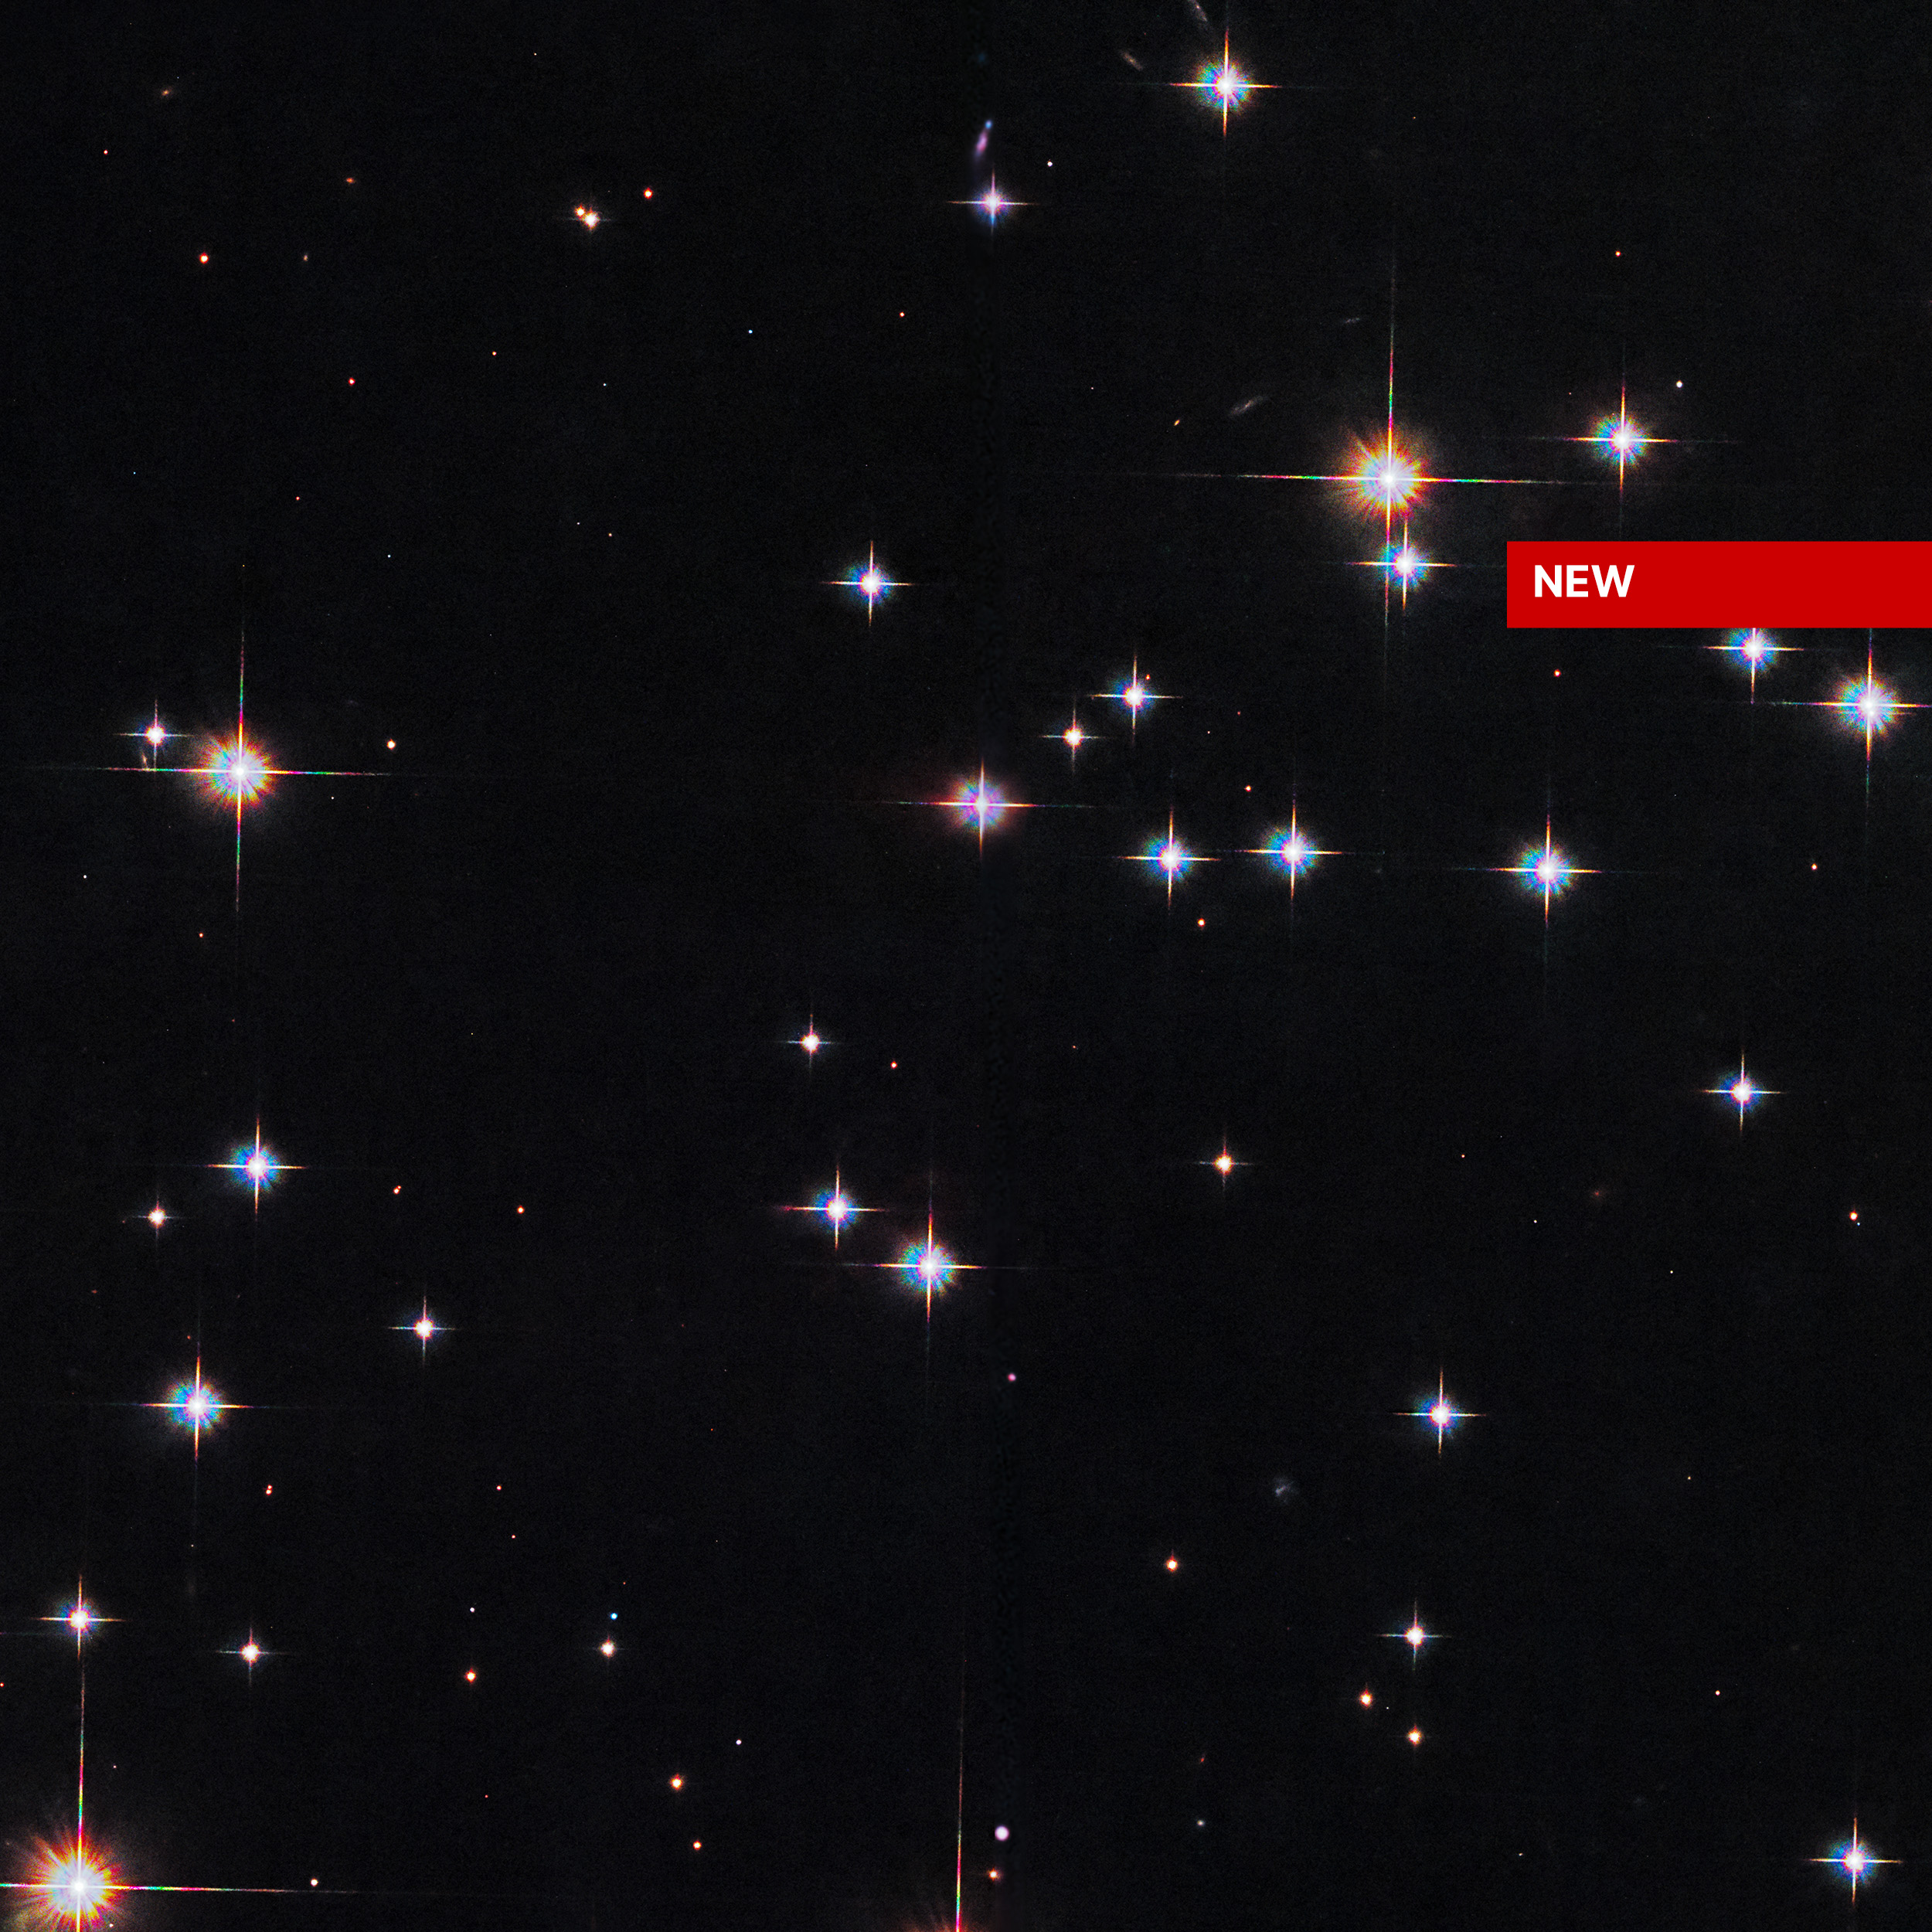 A scattering of white and reddish stars on a black background. A red box near the upper-right corner holds the word, "New" in white letters.